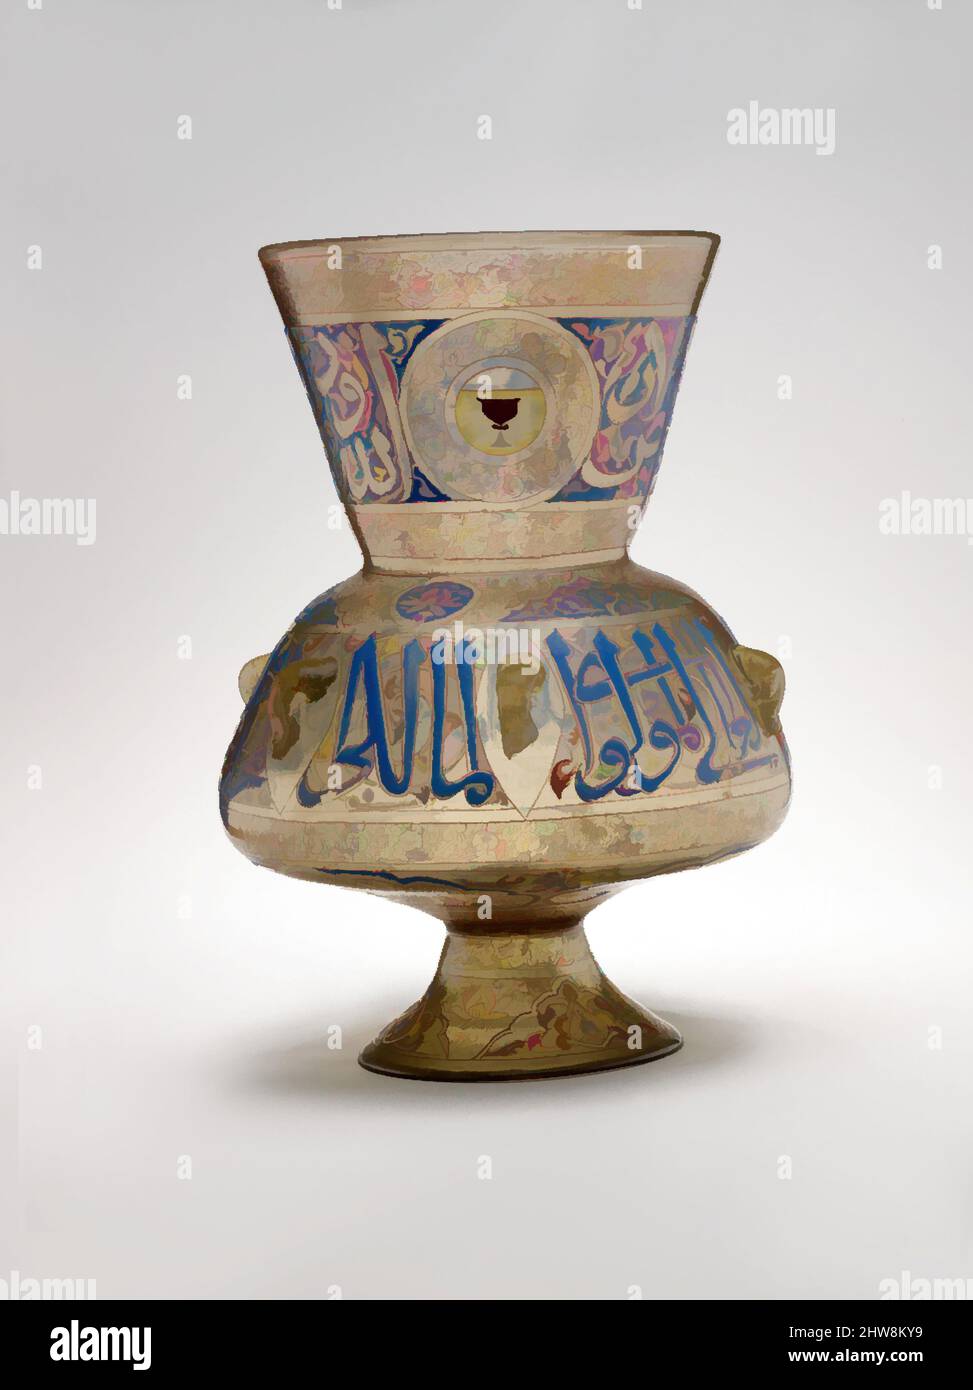 Art inspired by Mosque Lamp of Amir Qawsun, ca. 1329–35, Attributed to Egypt, Glass, colorless with brown tinge; blown, blown applied foot, enameled and gilded, H. 14 1/8 in. (35.9 cm), Glass, Ali ibn Muhammad al-Barmaki ?, Large glass lamps of this type were commissioned by sultans, Classic works modernized by Artotop with a splash of modernity. Shapes, color and value, eye-catching visual impact on art. Emotions through freedom of artworks in a contemporary way. A timeless message pursuing a wildly creative new direction. Artists turning to the digital medium and creating the Artotop NFT Stock Photo